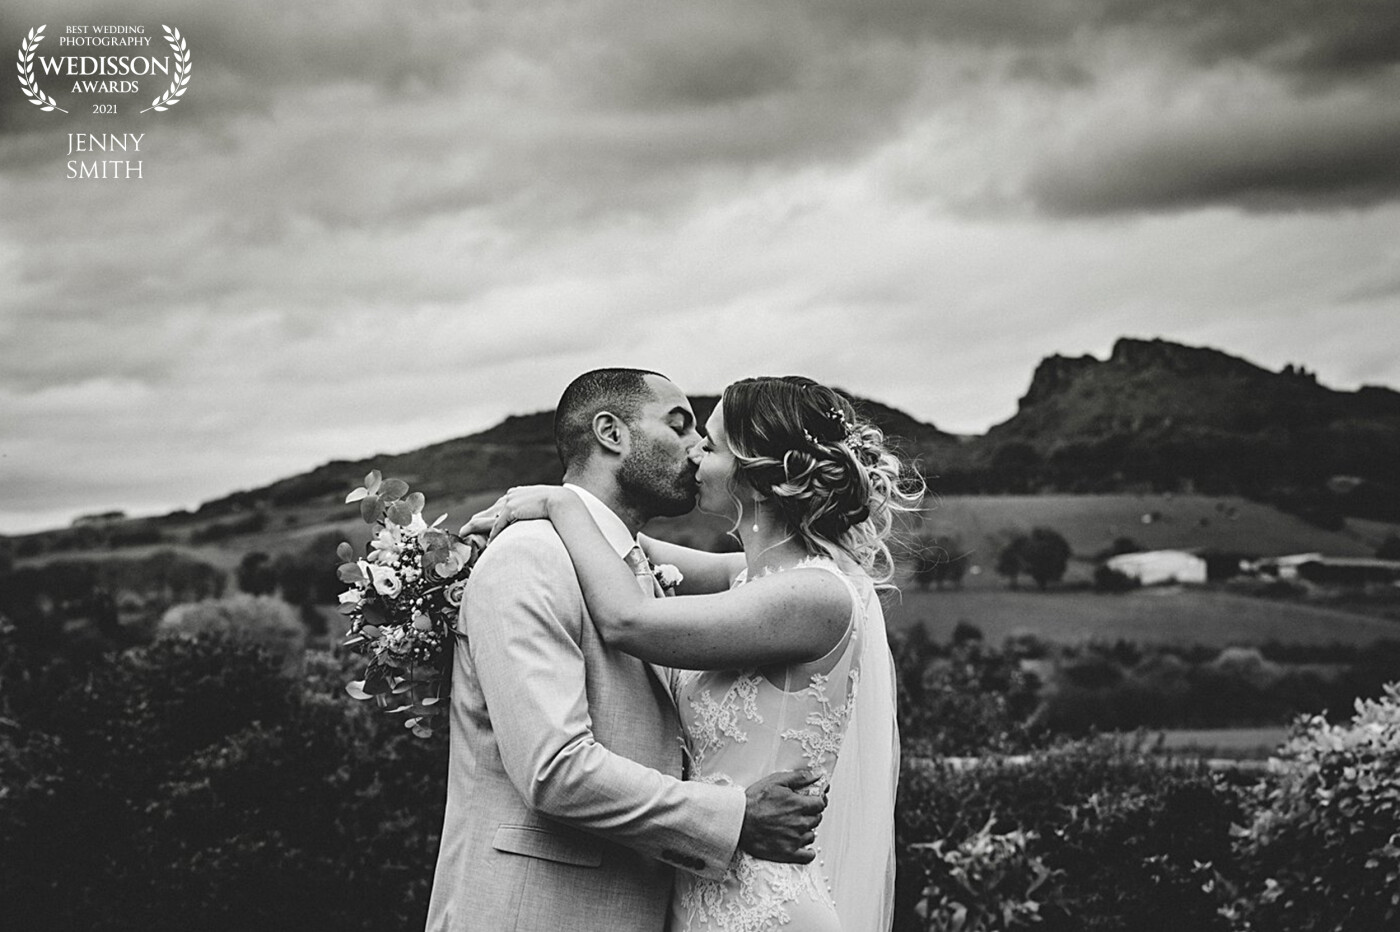 Sarah & Ben are keen climbers - this photo captures them on their wedding day in front of the Roaches which is a place special to them.